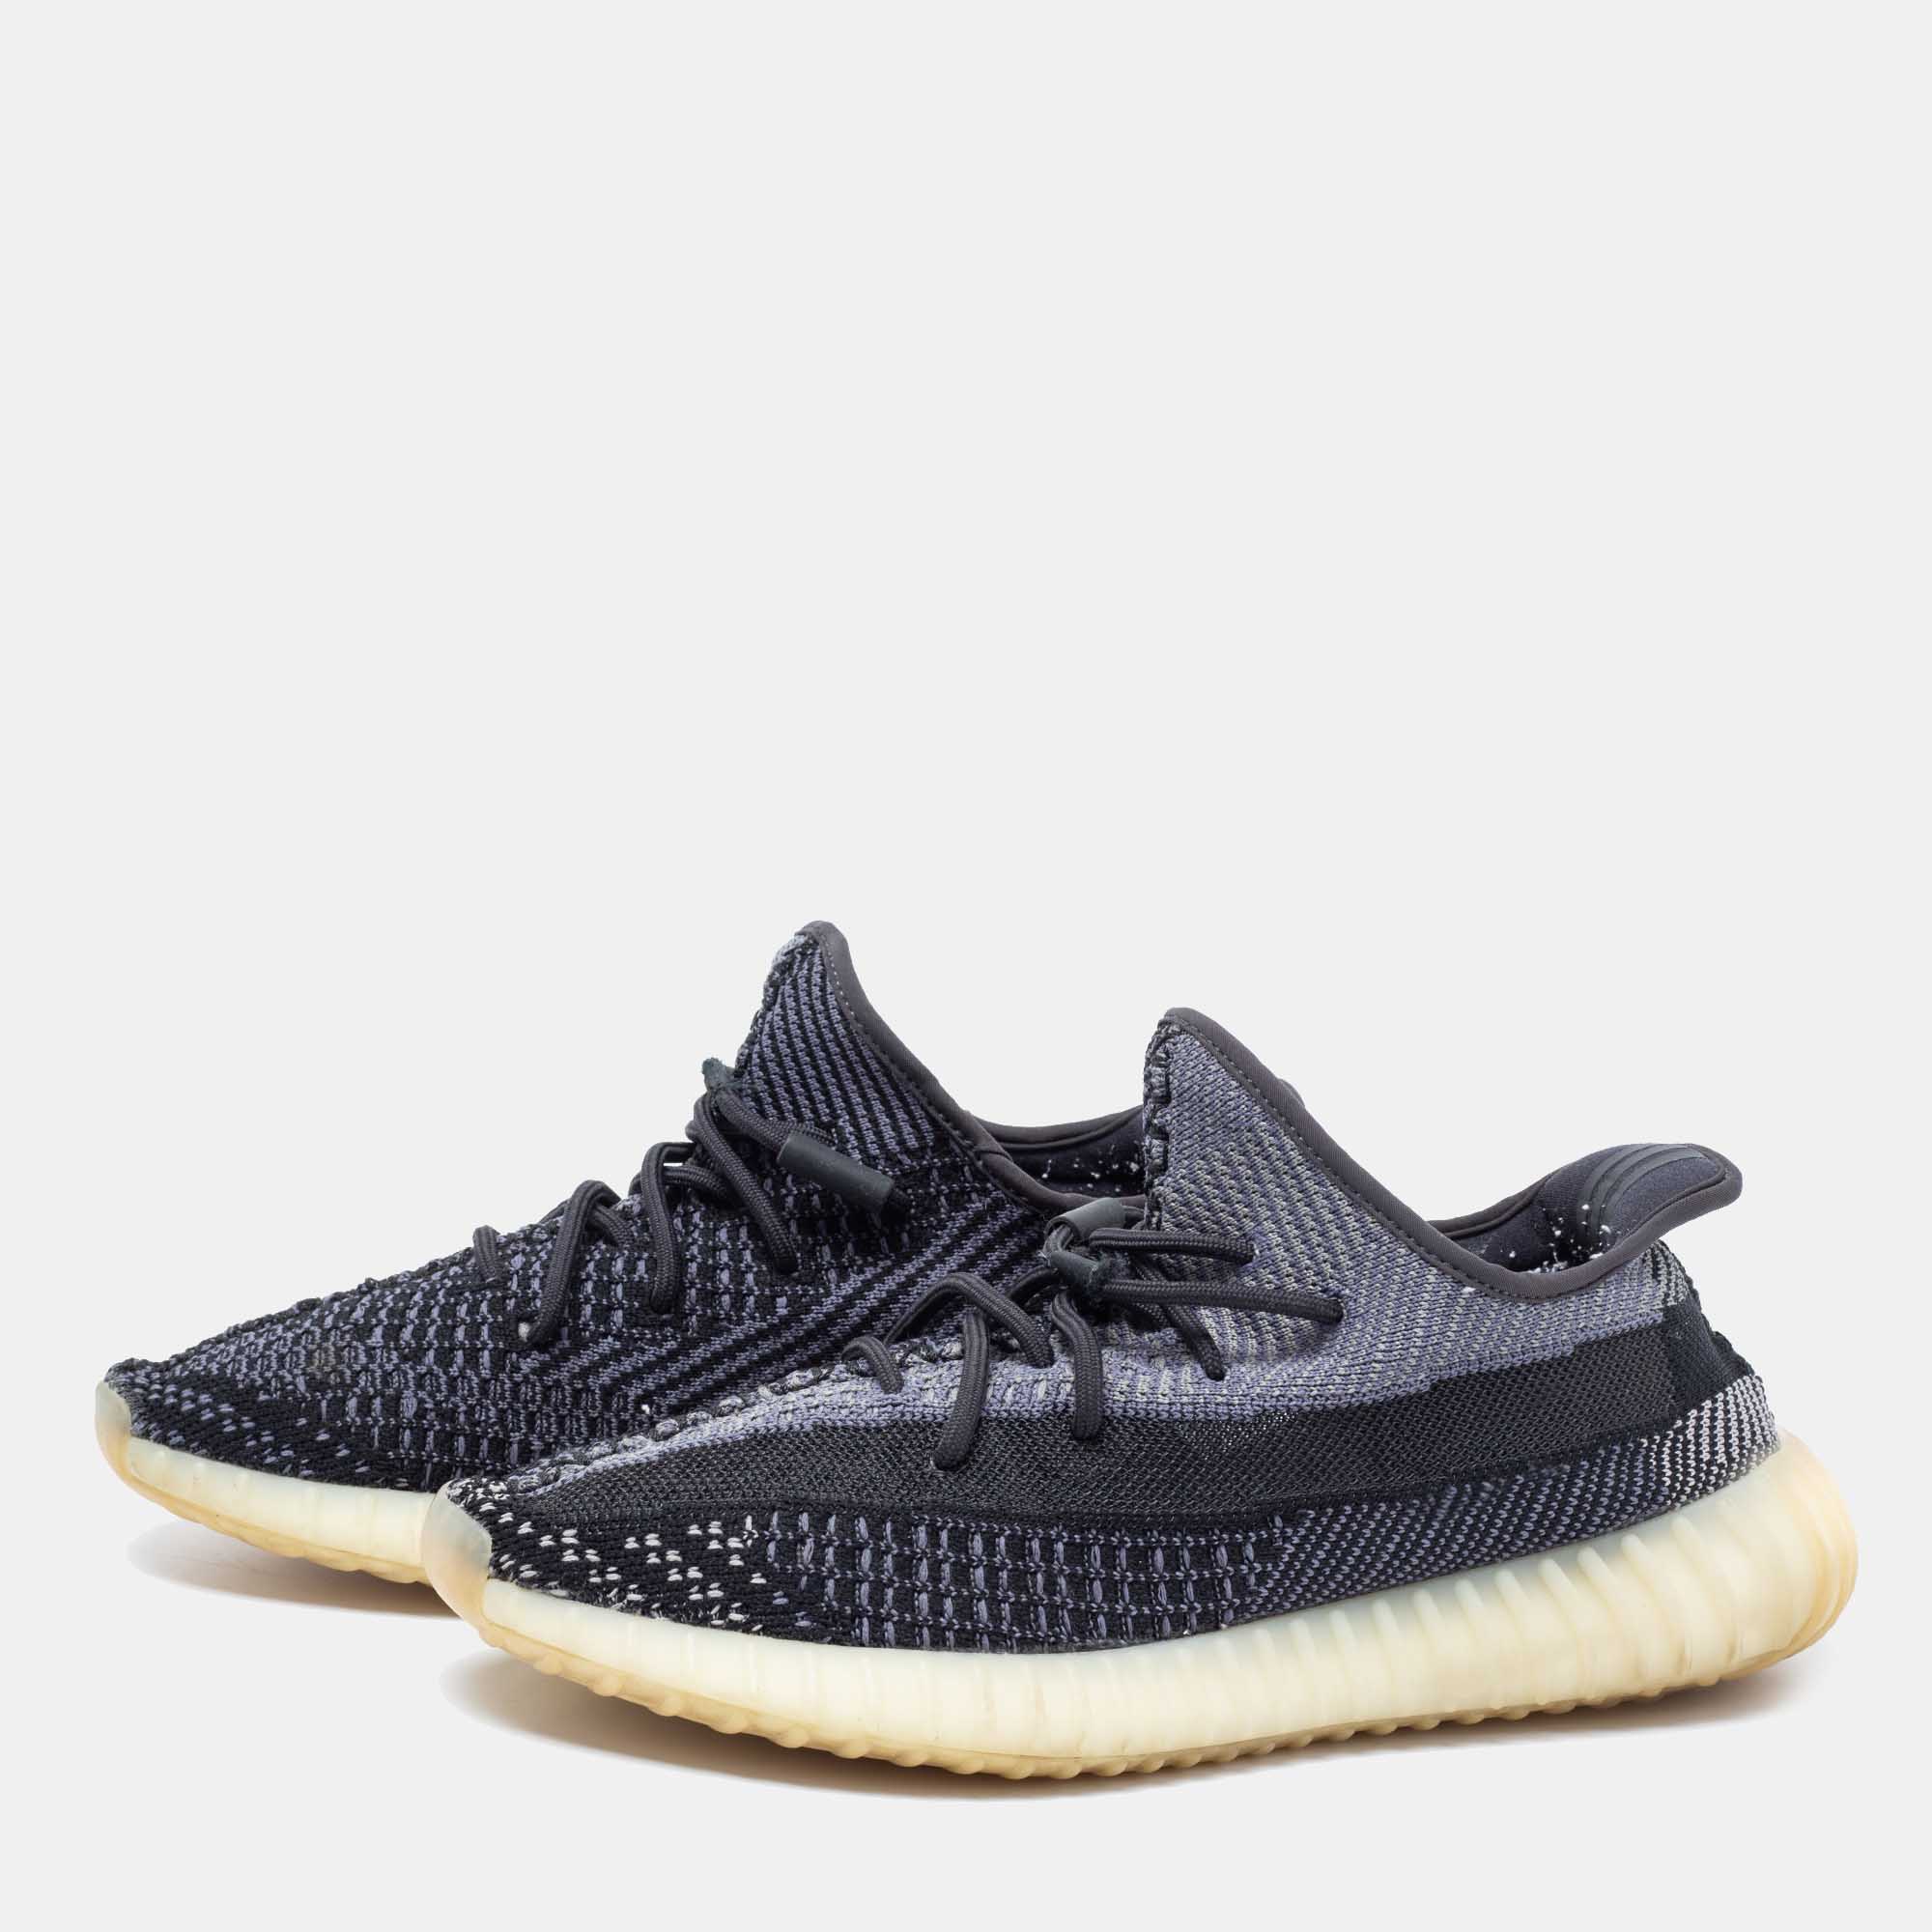 Yeezy x Adidas Black Knit Fabric Boost 350 V2 Carbon Low-Top Sneakers Size 43 1/3  - buy with discount